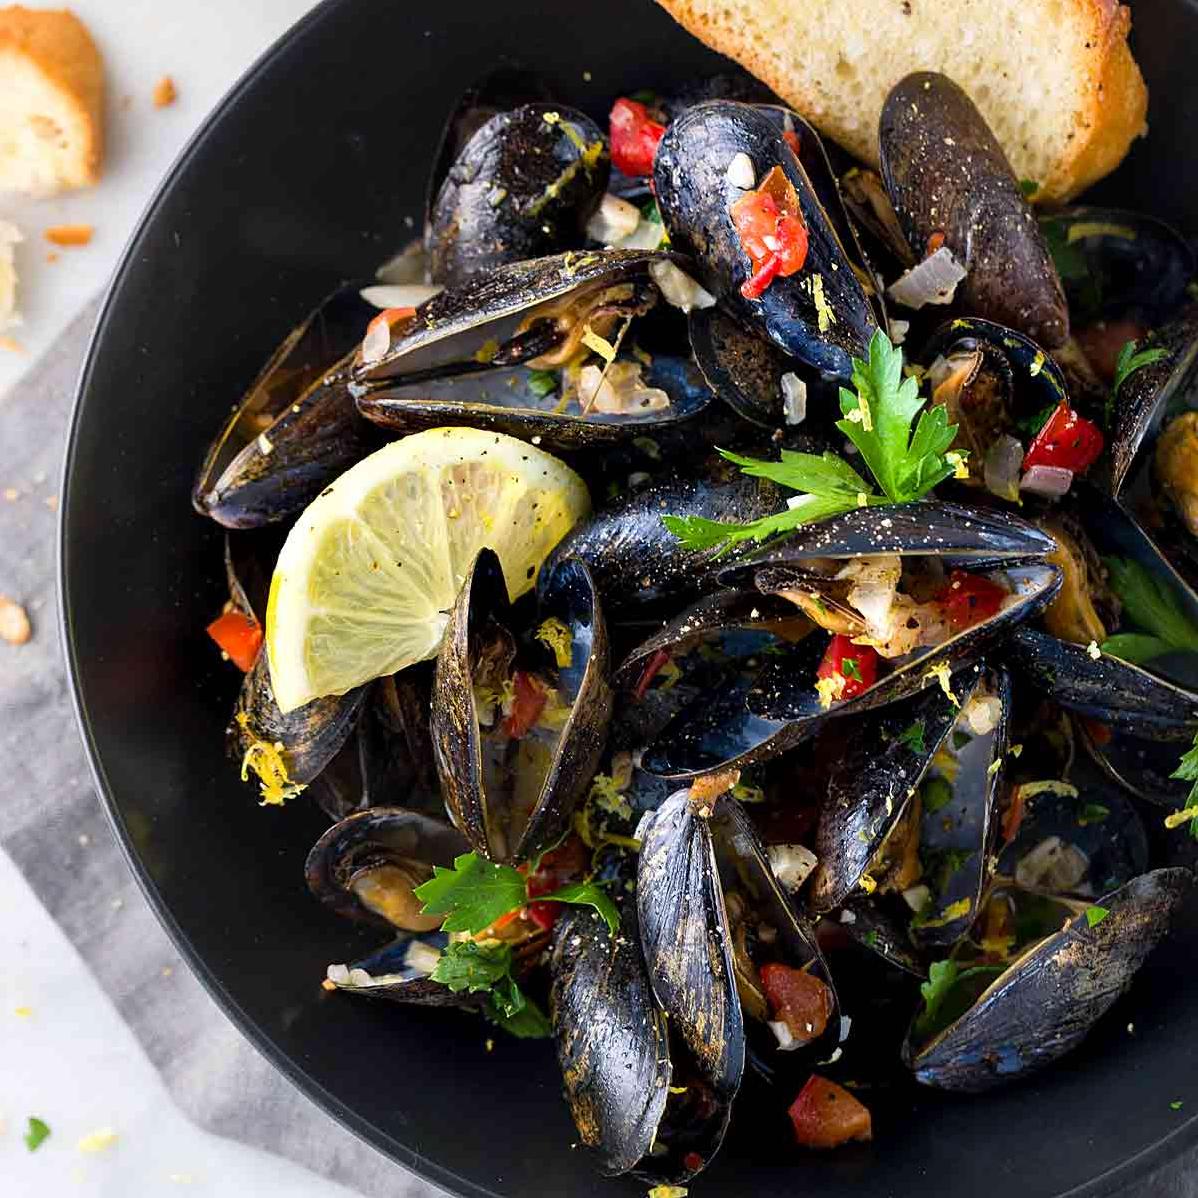  Nothing beats fresh and succulent mussels steamed and served in white wine!